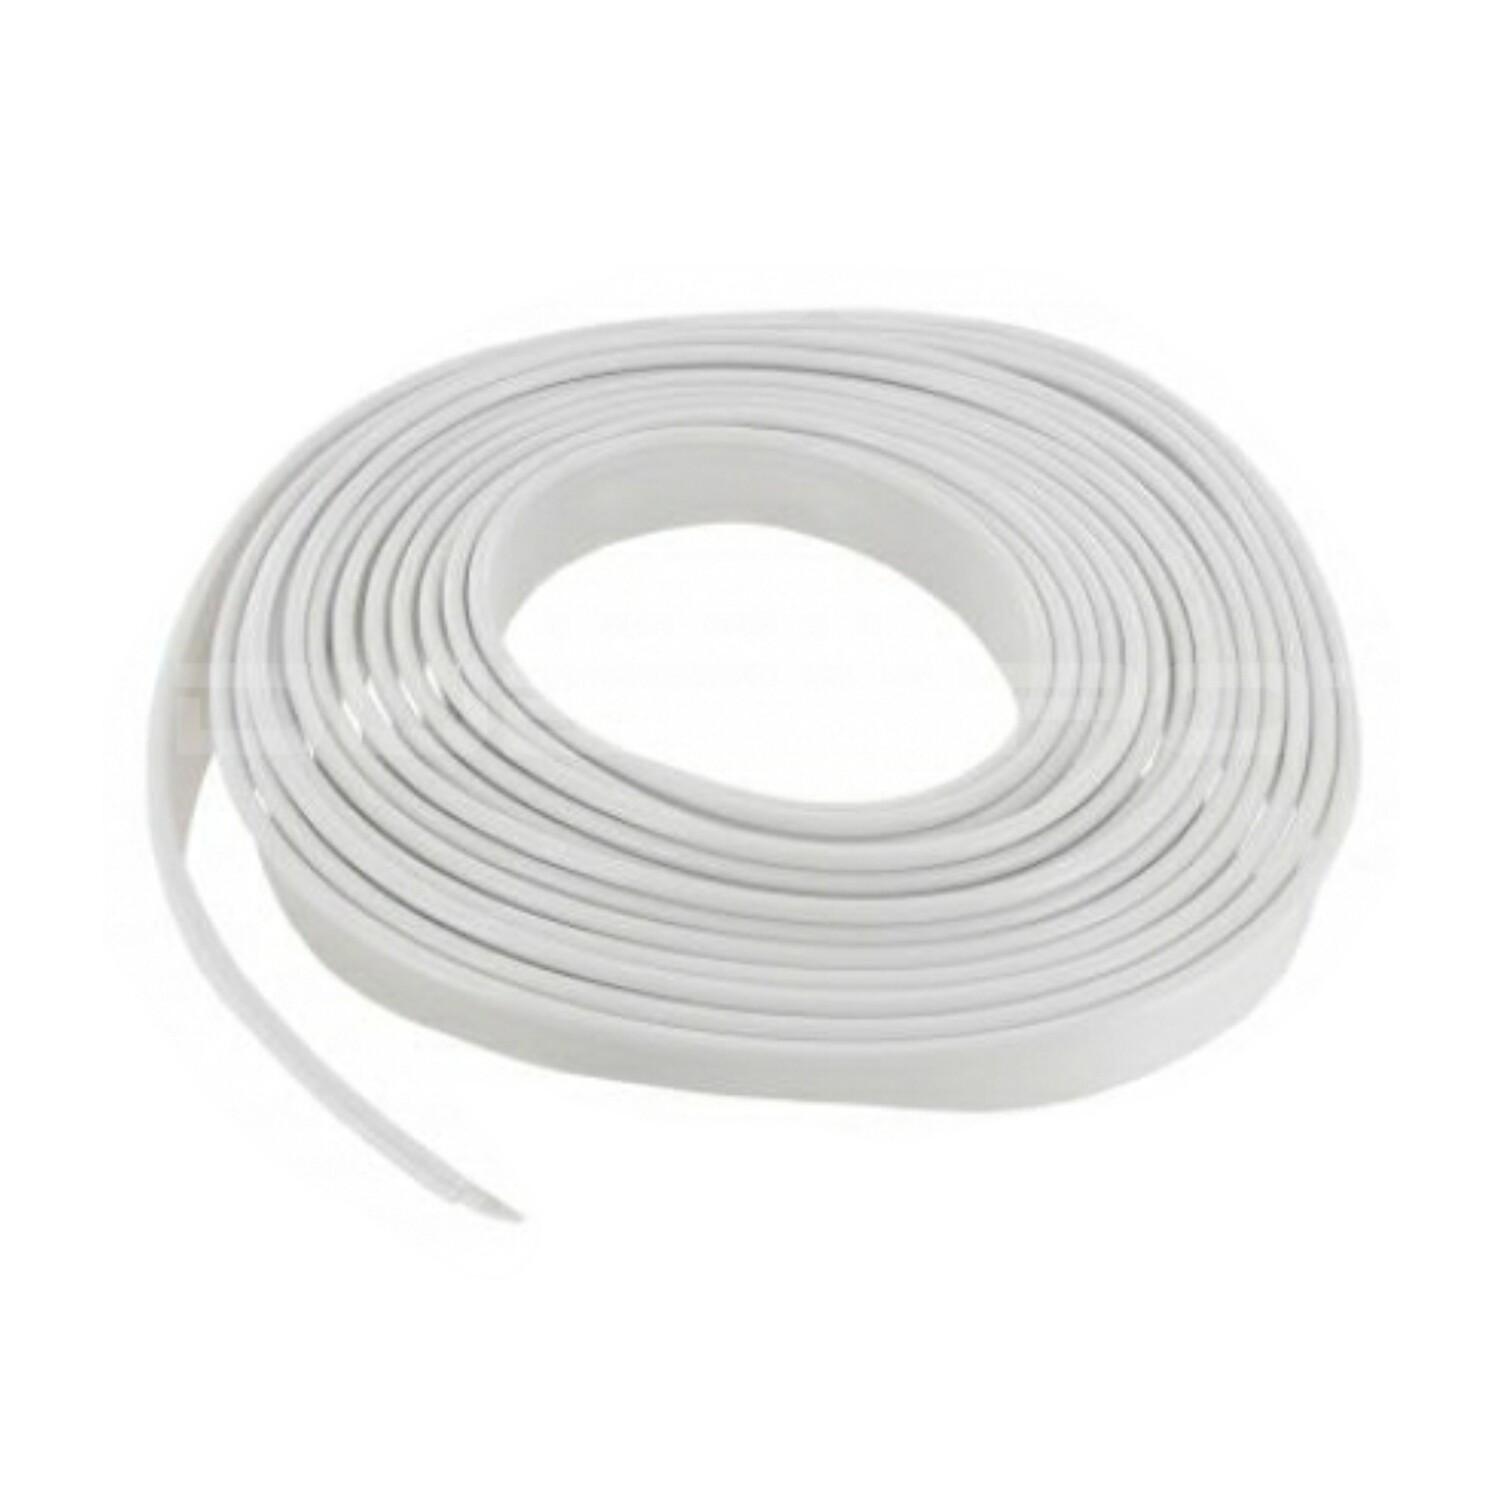 Guard Pipe Beading, White, 25ft Roll